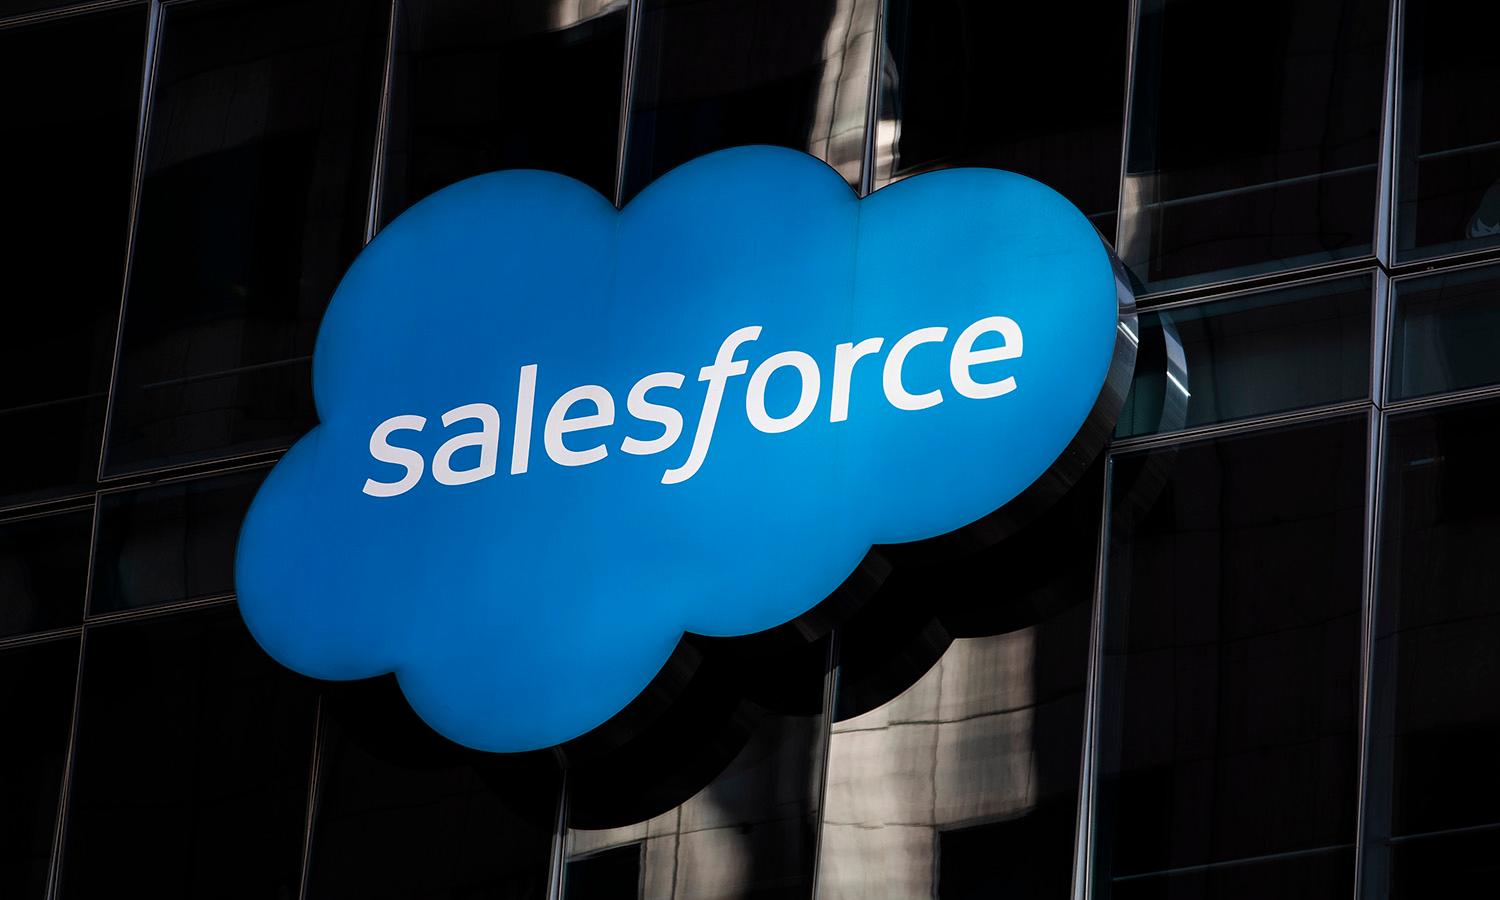 The Salesforce logo is seen at its headquarters on Dec. 1, 2020, in San Francisco. (Stephen Lam/Getty Images)